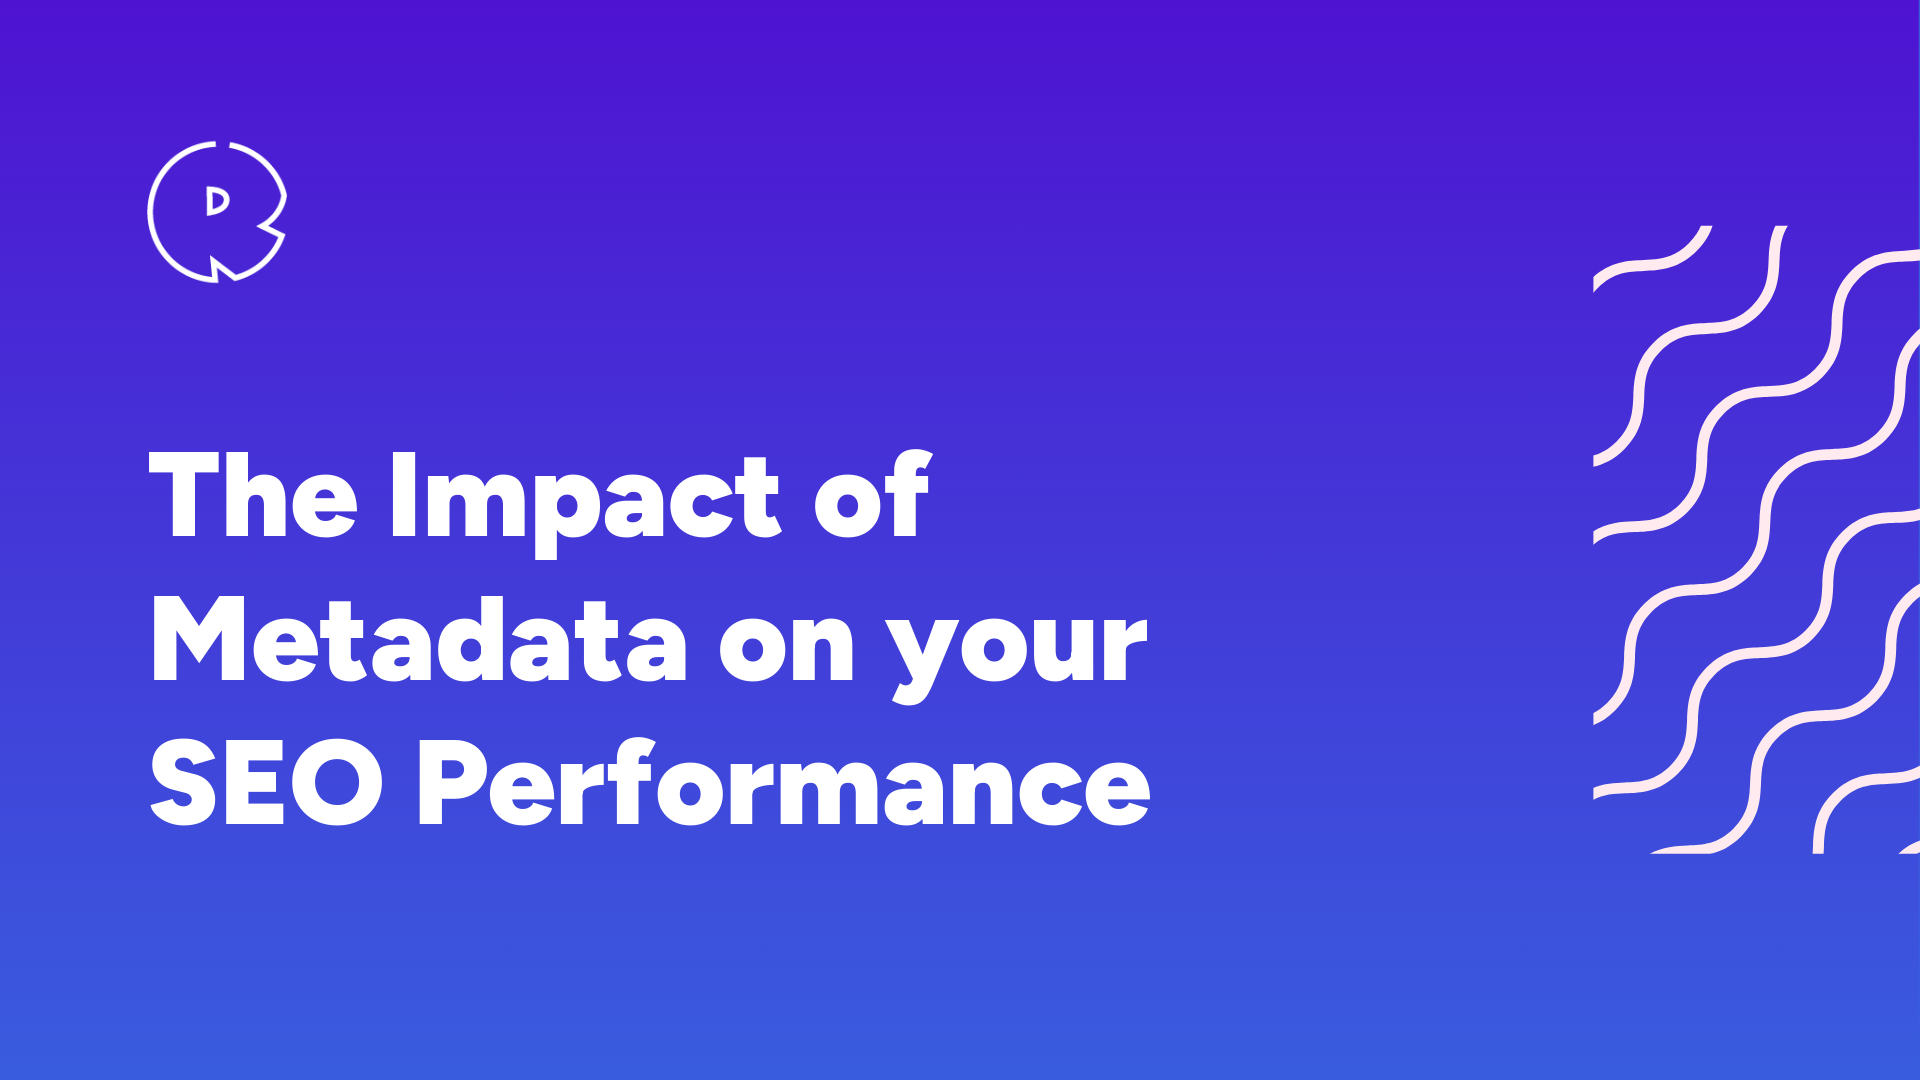 The Impact of Metadata on your SEO Performance